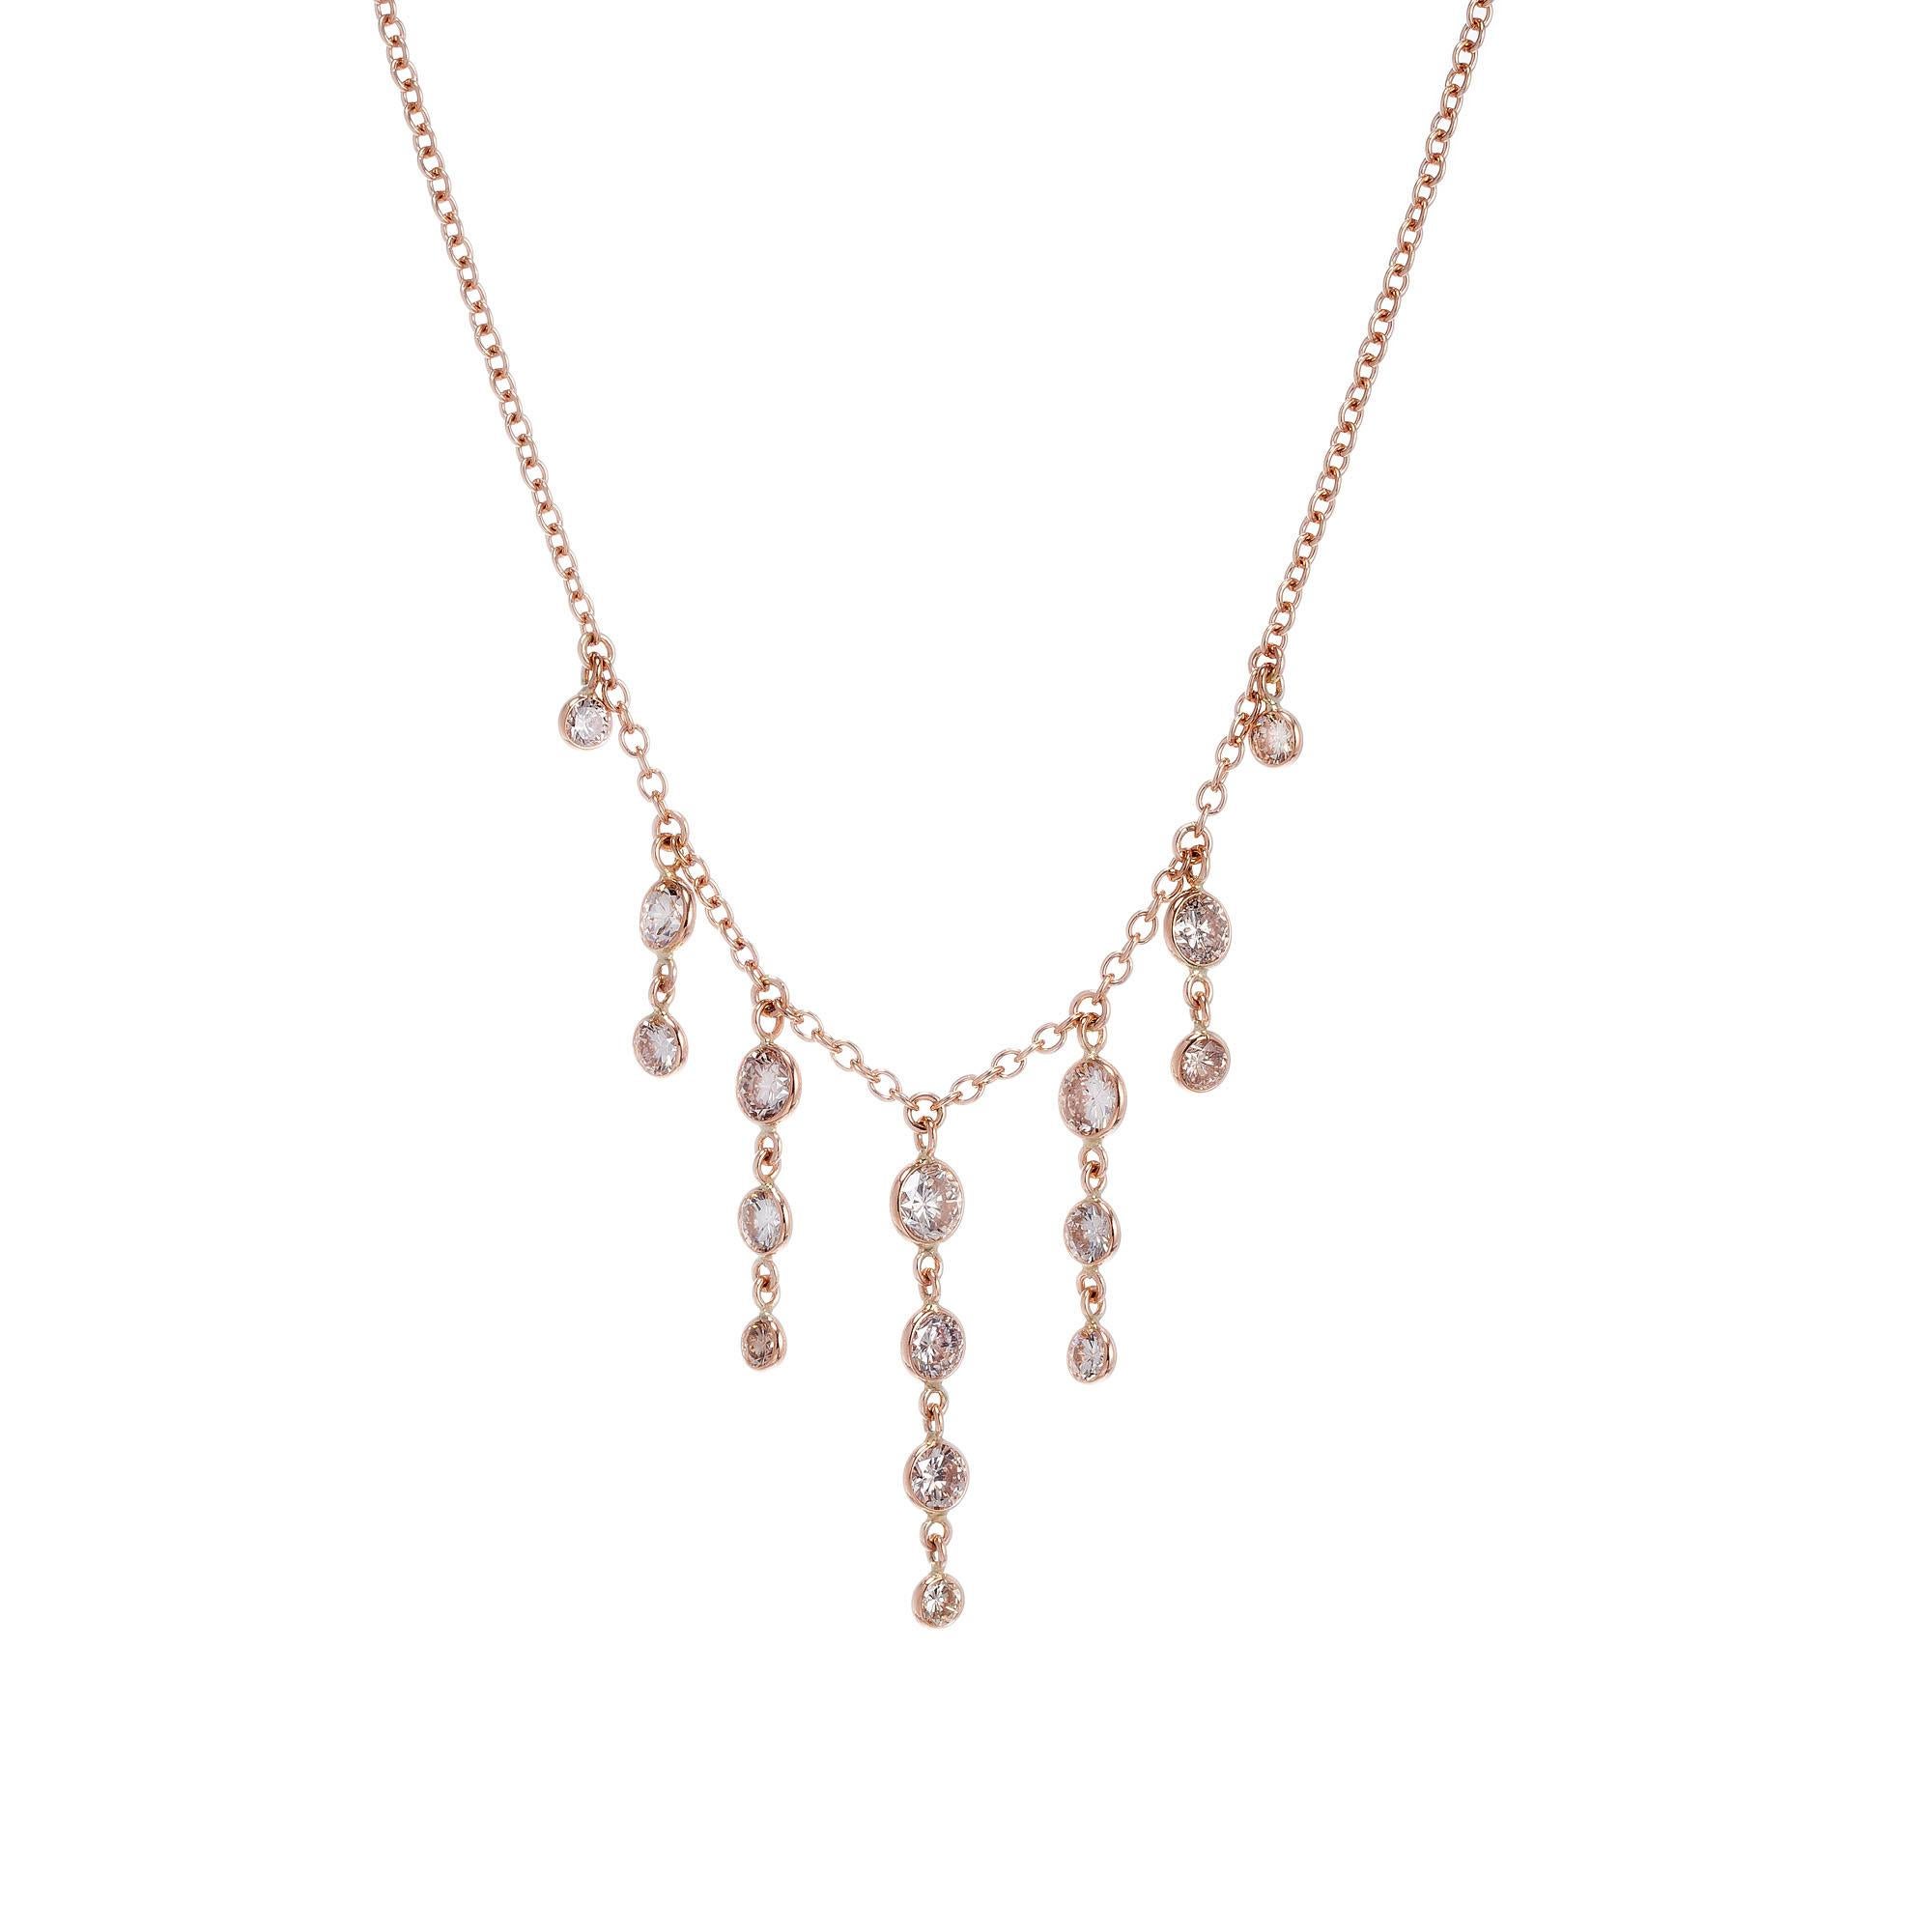 14k rose gold Diamond by the Yard style necklace made with natural slightly pinkish brown estate diamonds in a classic dangle drop pendant design. 18 inches

16 natural light to medium brown full cut diamonds .05ct to .20ct, approx. total weight